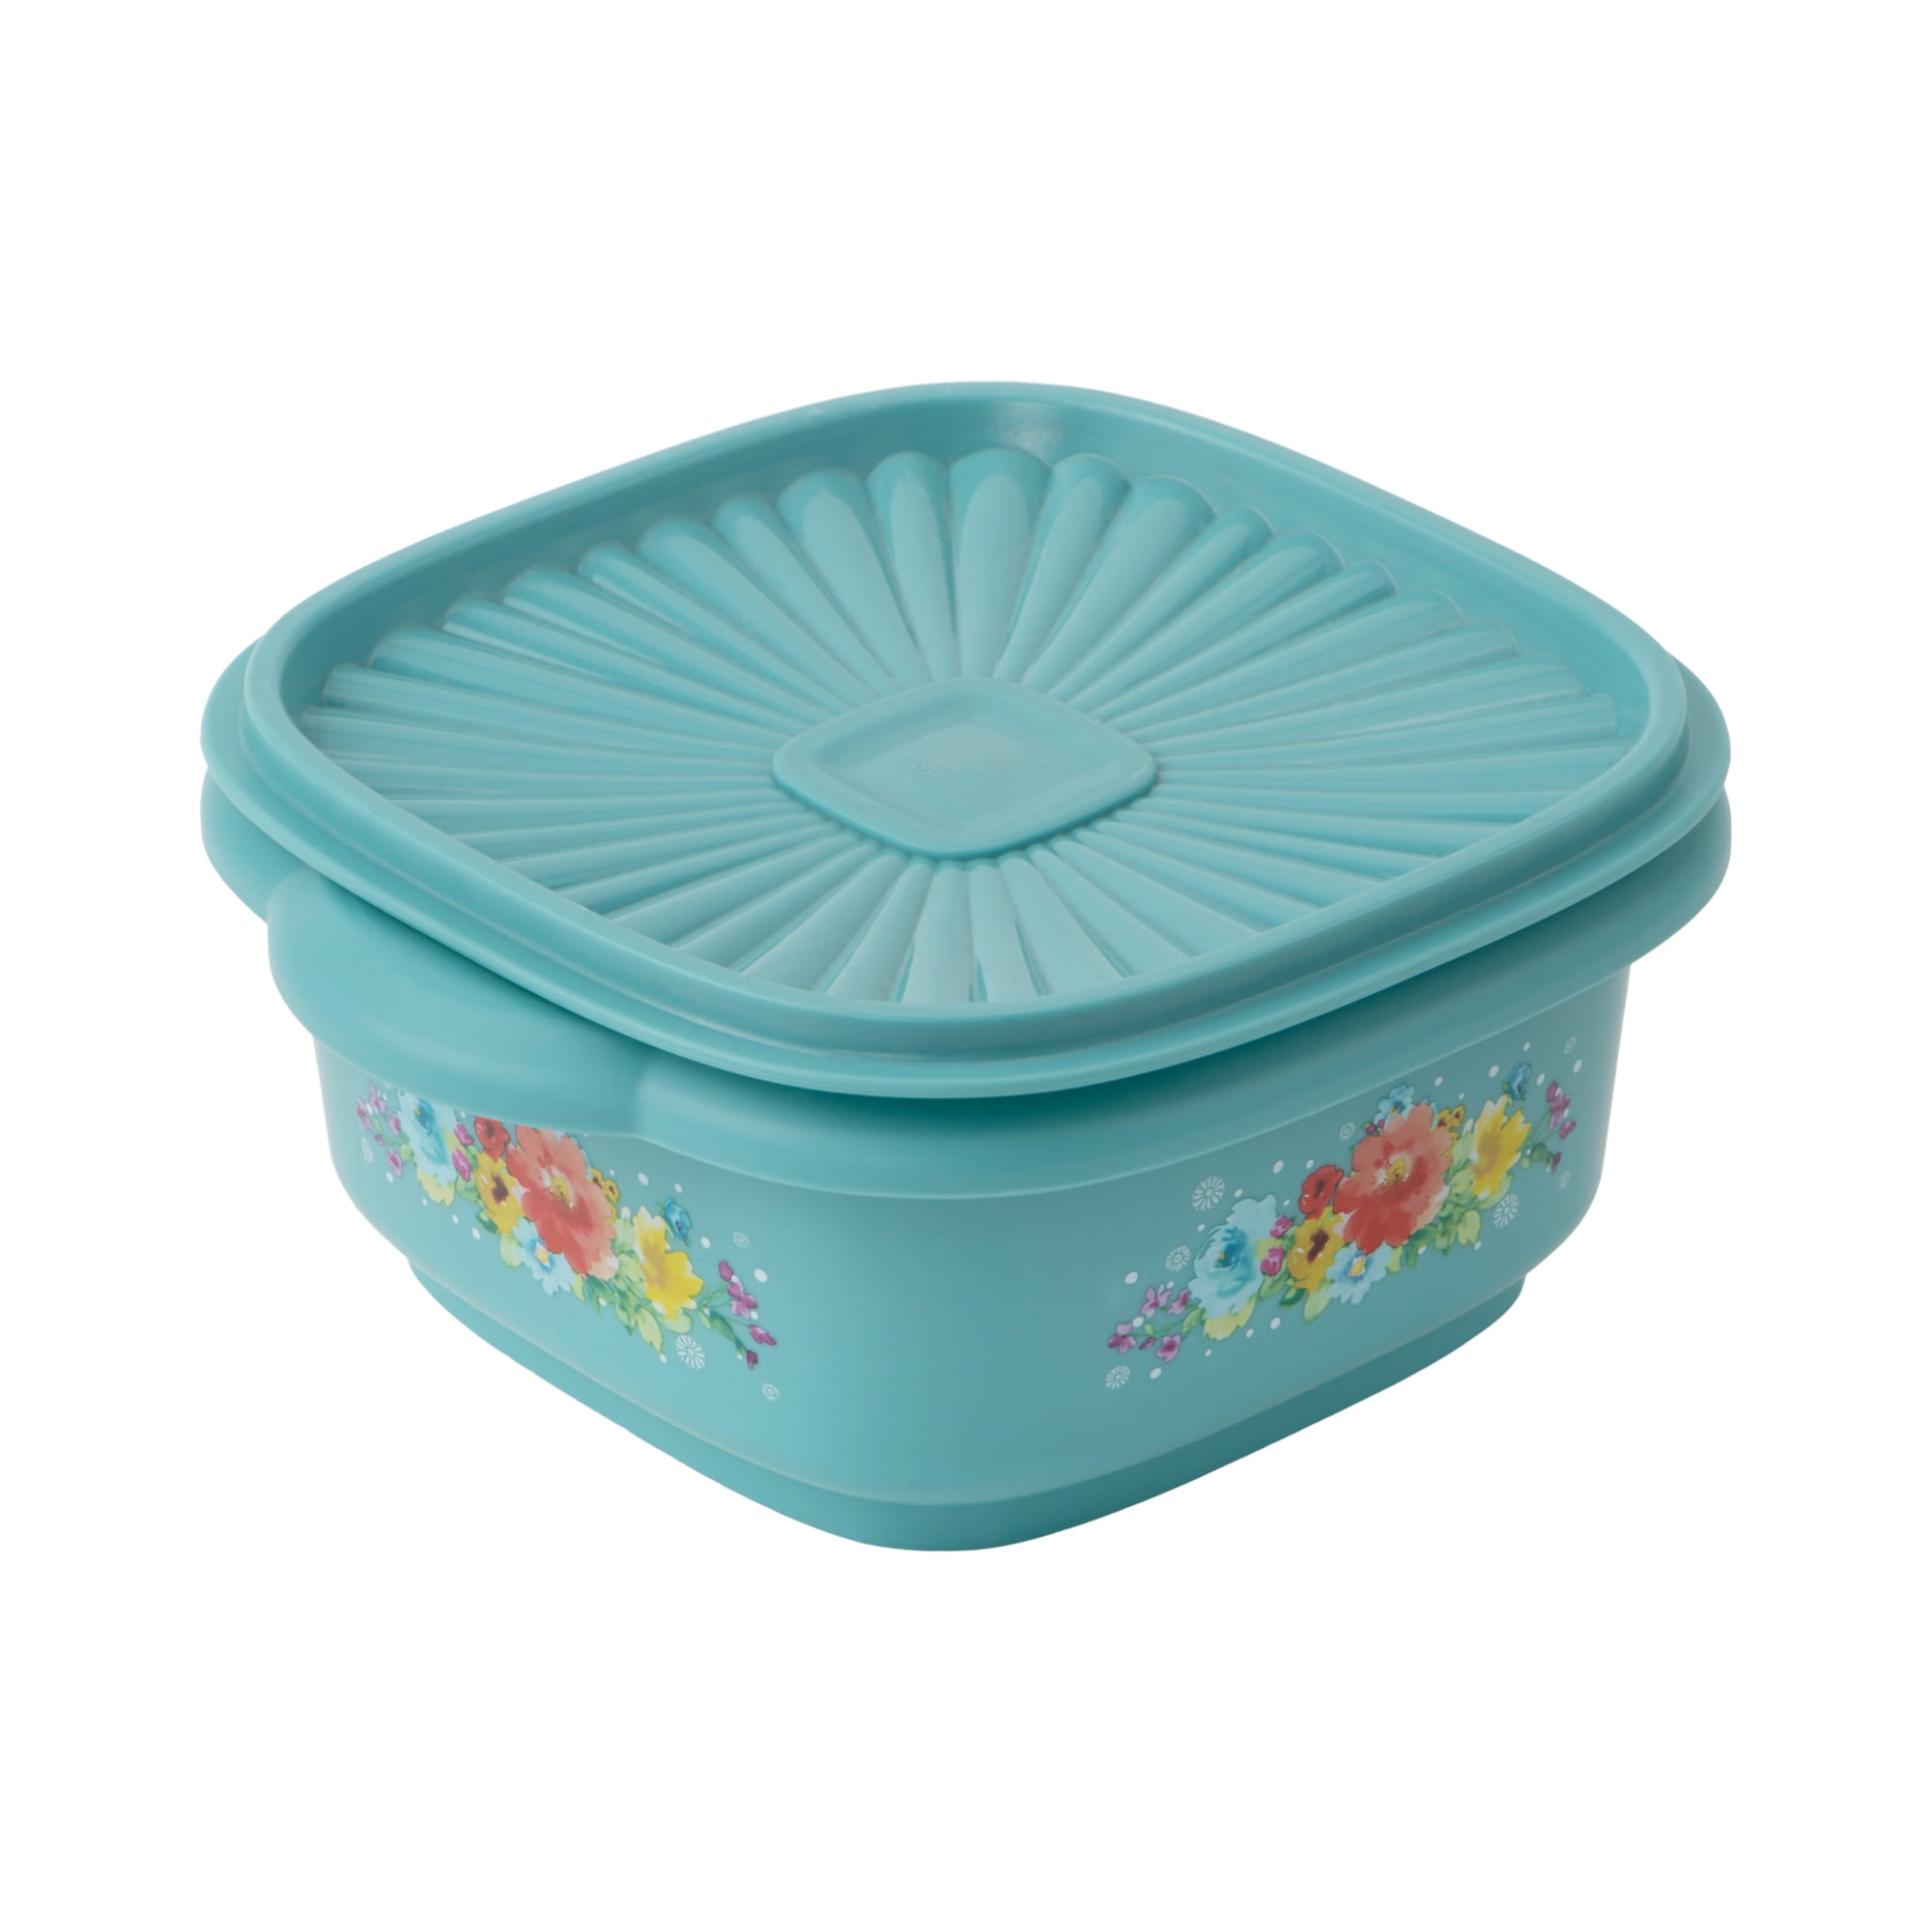 NEW* Amazing Locking Lids for Cookie Sheets, Blog